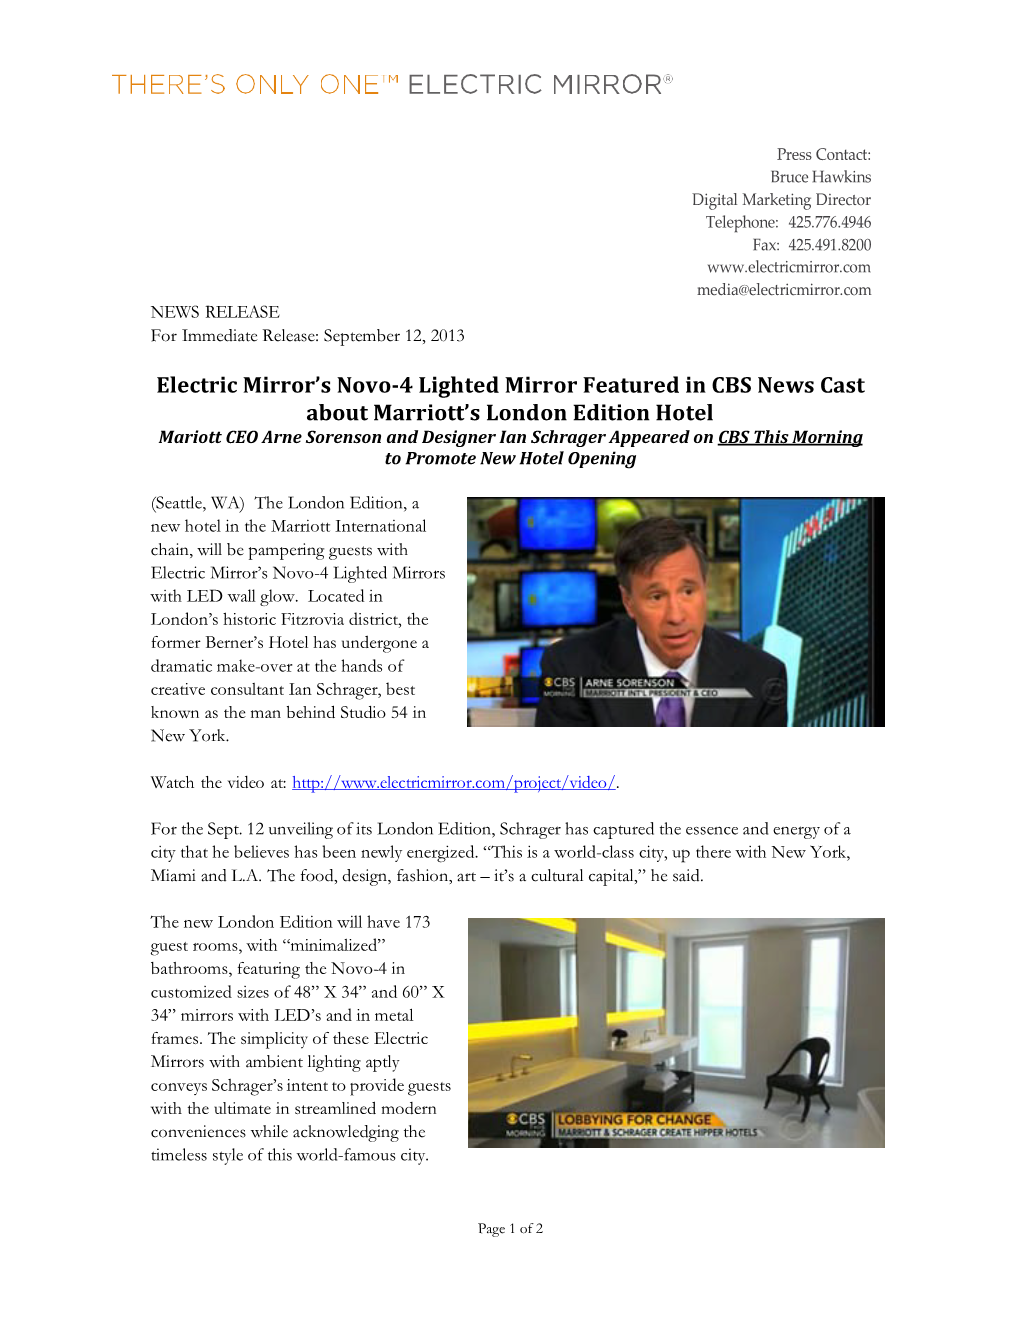 Electric Mirror's Novo-4 Lighted Mirror Featured in CBS News Cast About Marriott's London Edition Hotel